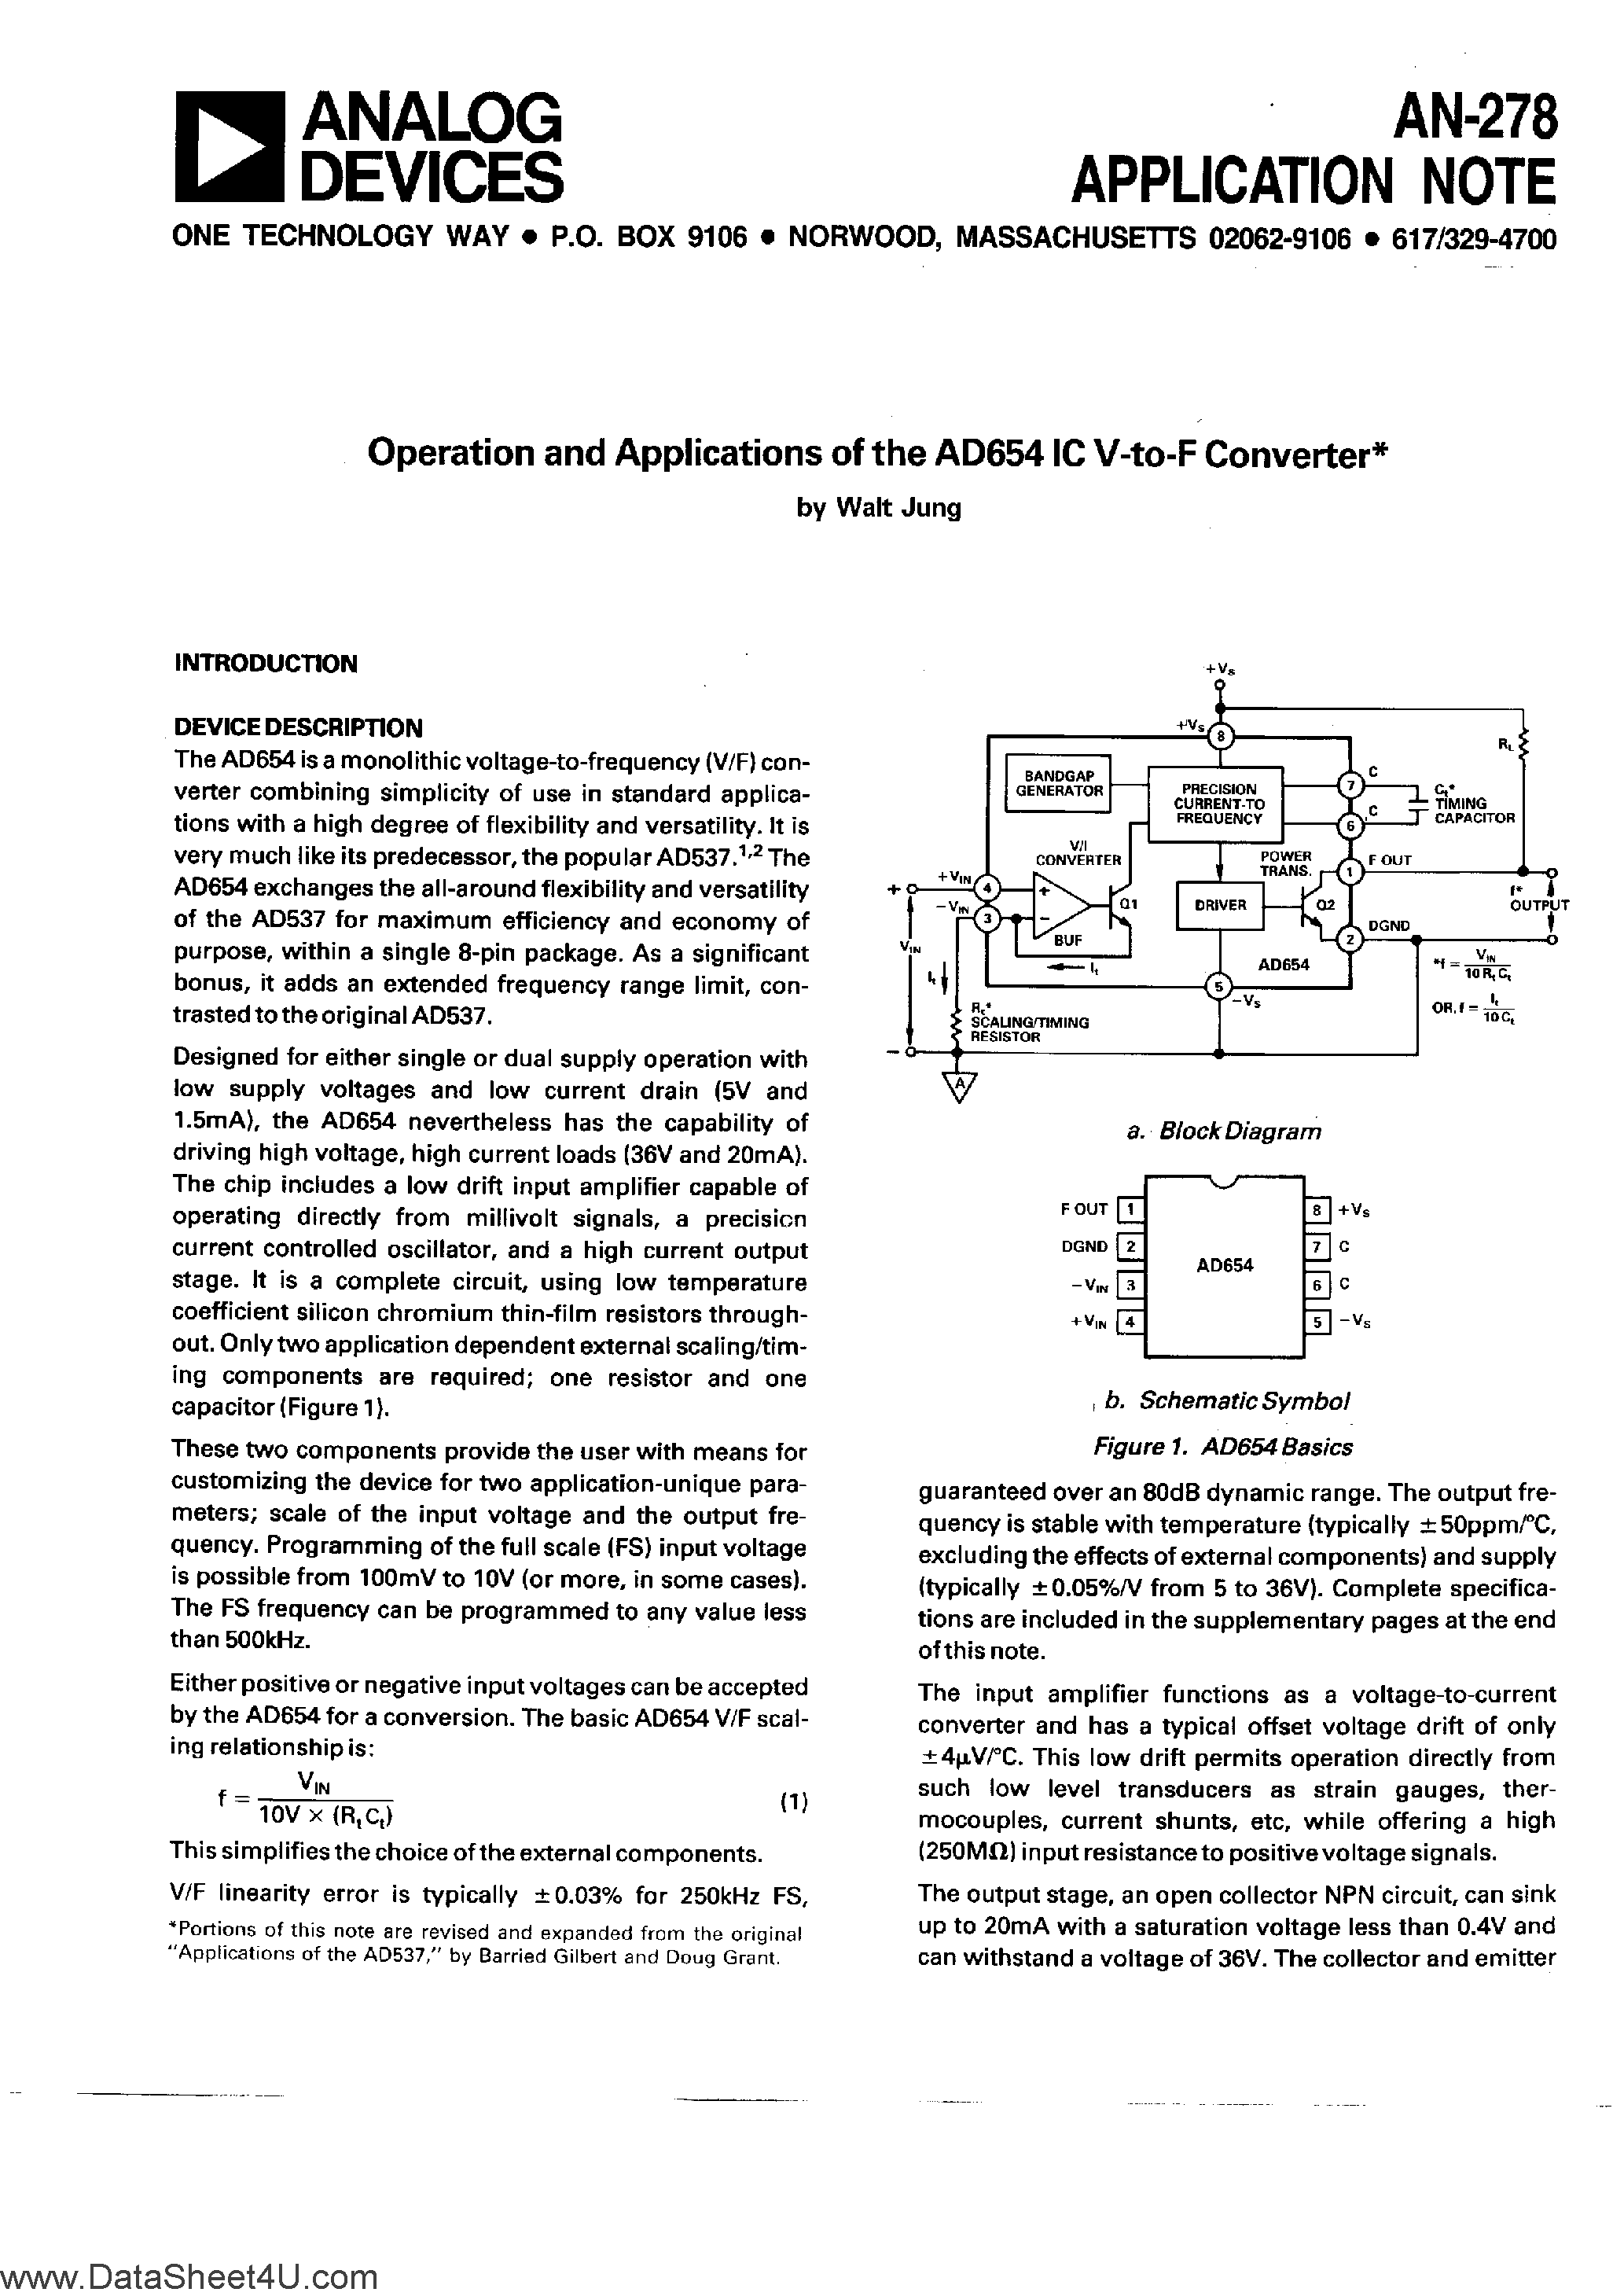 Datasheet AN278 - Operation and Applications of the AD654 IC V to F Converter page 1